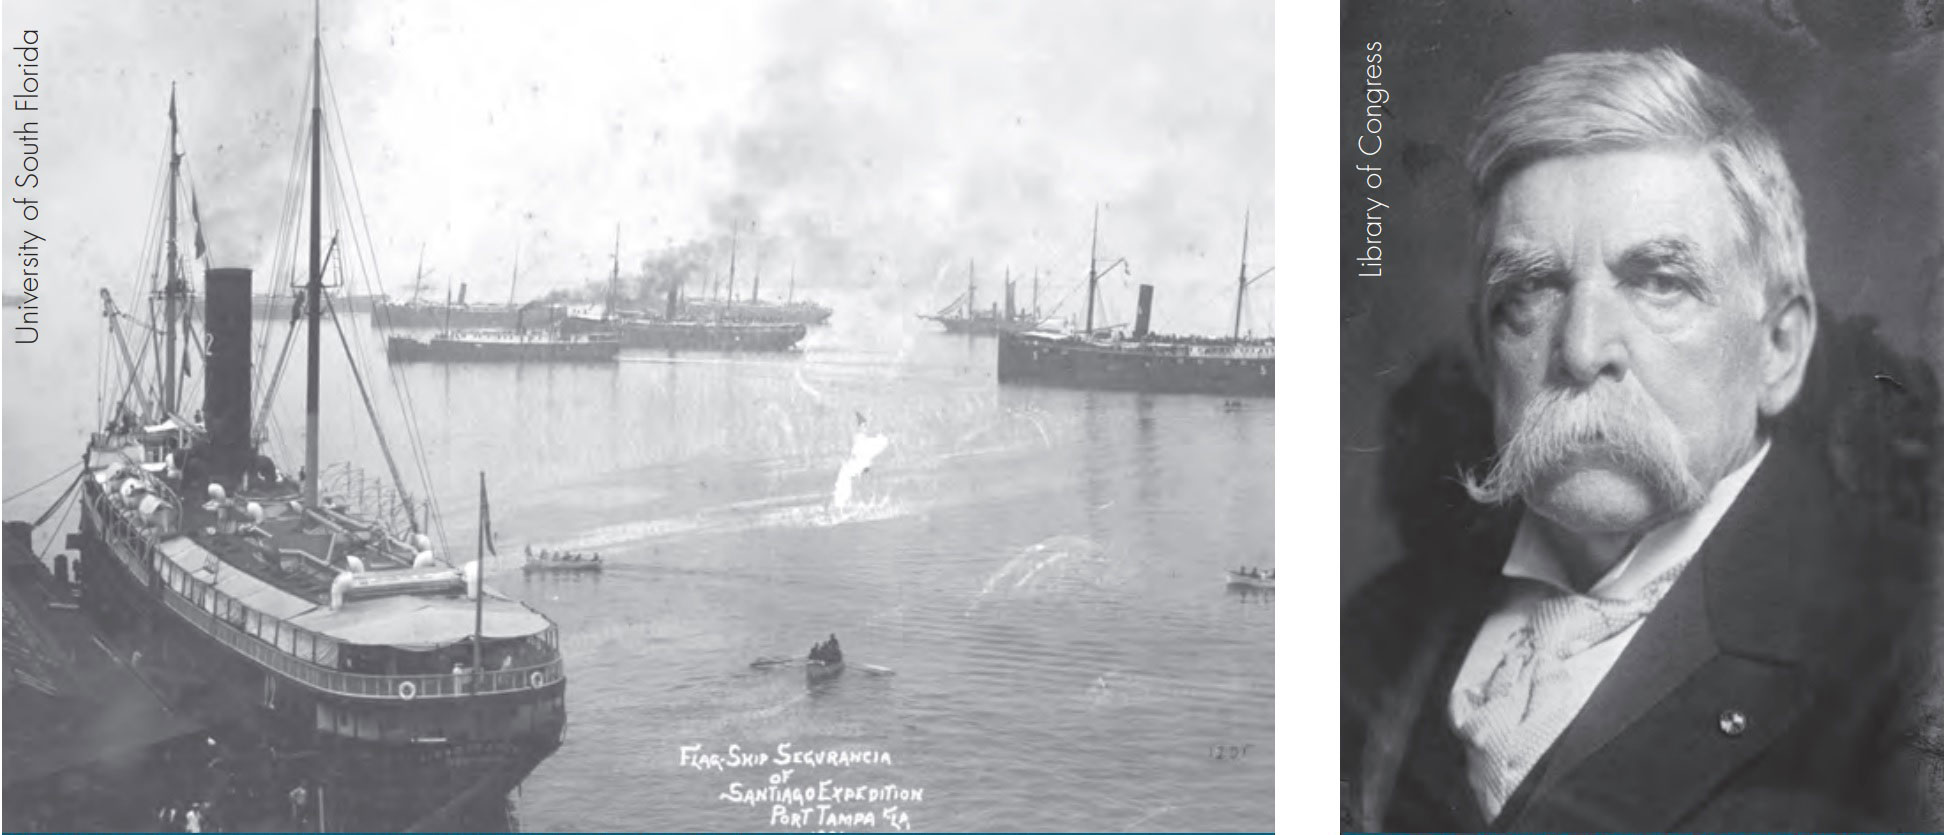 Image left: The expedition flagship Seguranca at the pier in Tampa before departing for Cuba. Image right: Grenville Dodge, c. 1900.